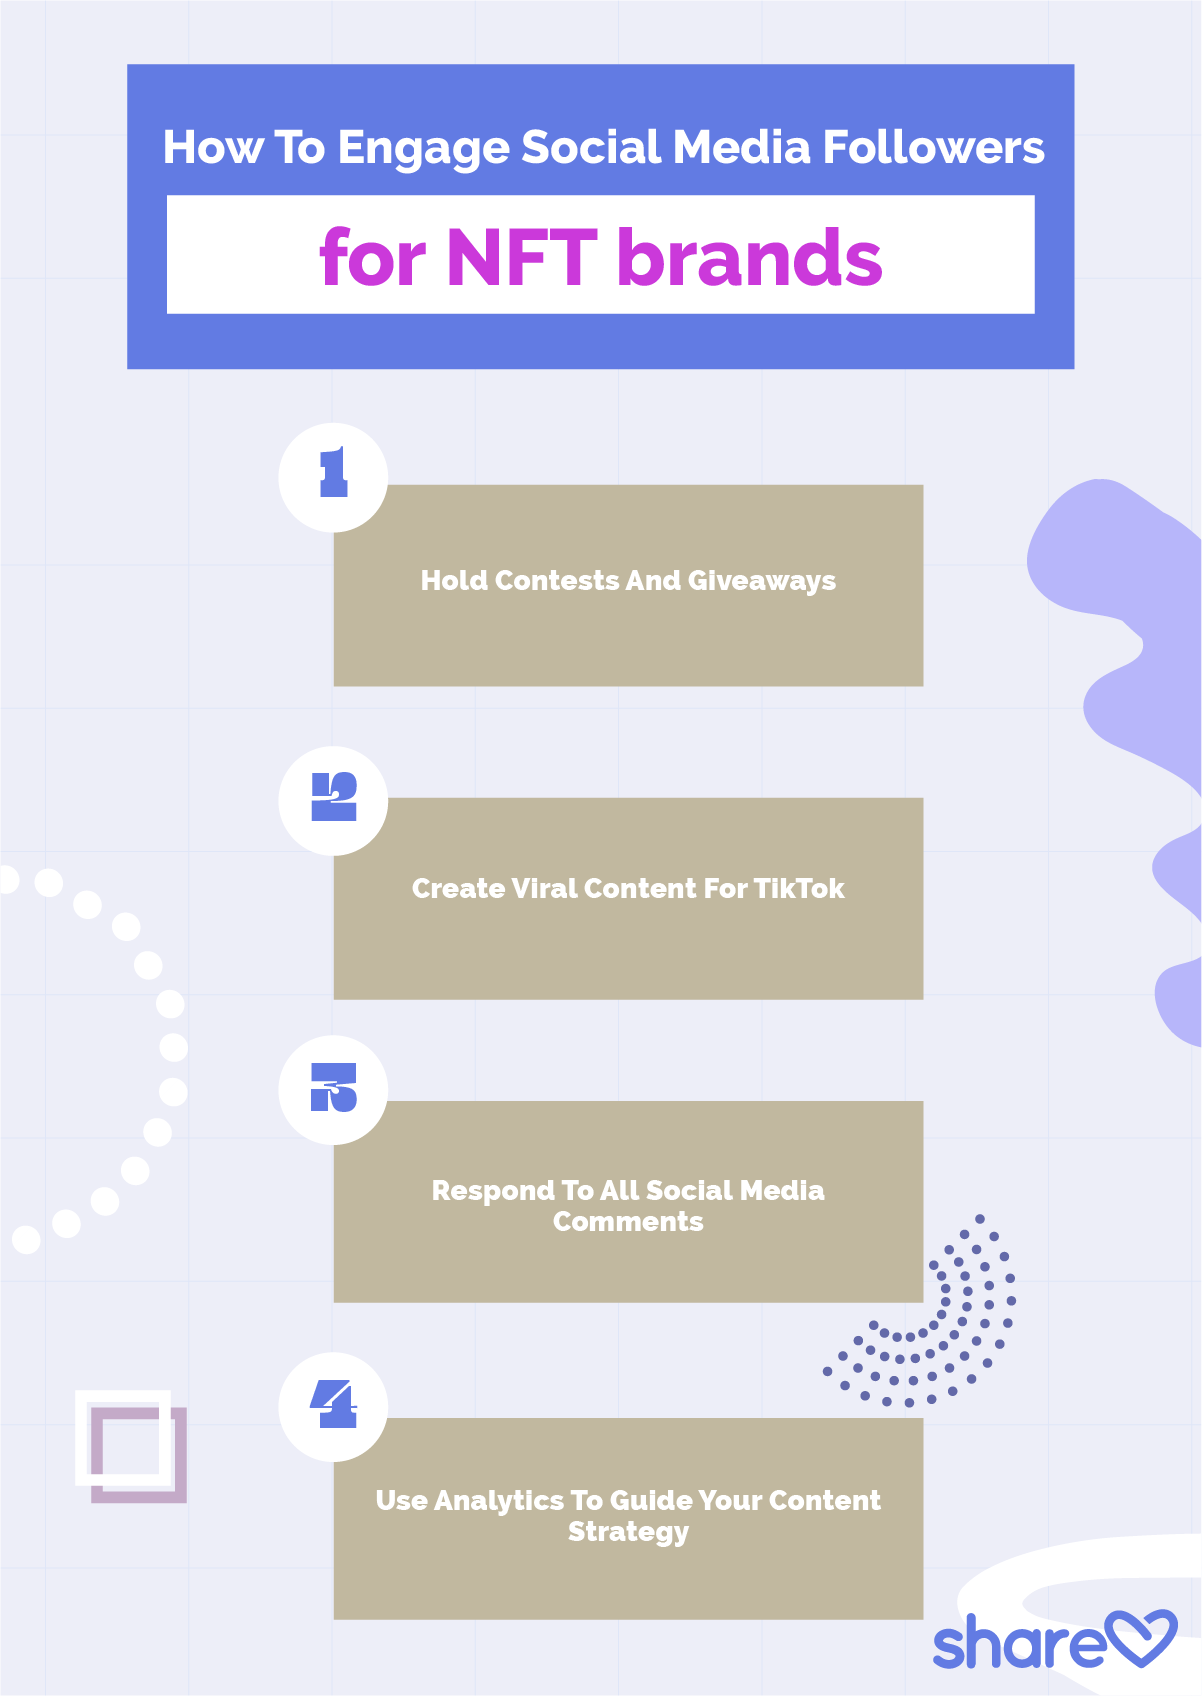 How To Engage Social Media Followers for NFT brands